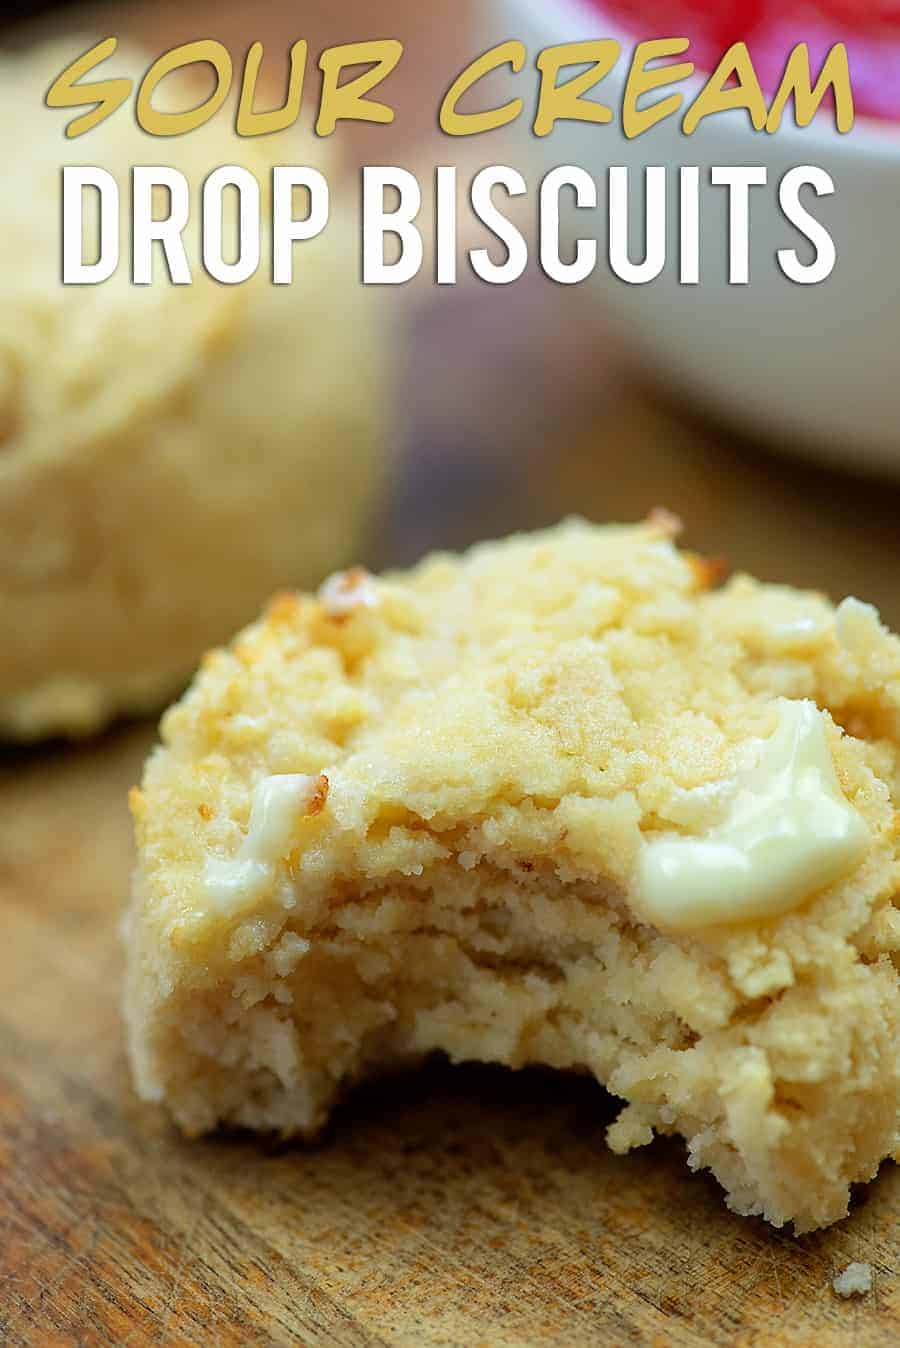 Sour Cream Drop Biscuits - low carb and gluten free! These biscuits melt in your mouth! #lowcarb #keto #glutenfree #recipe